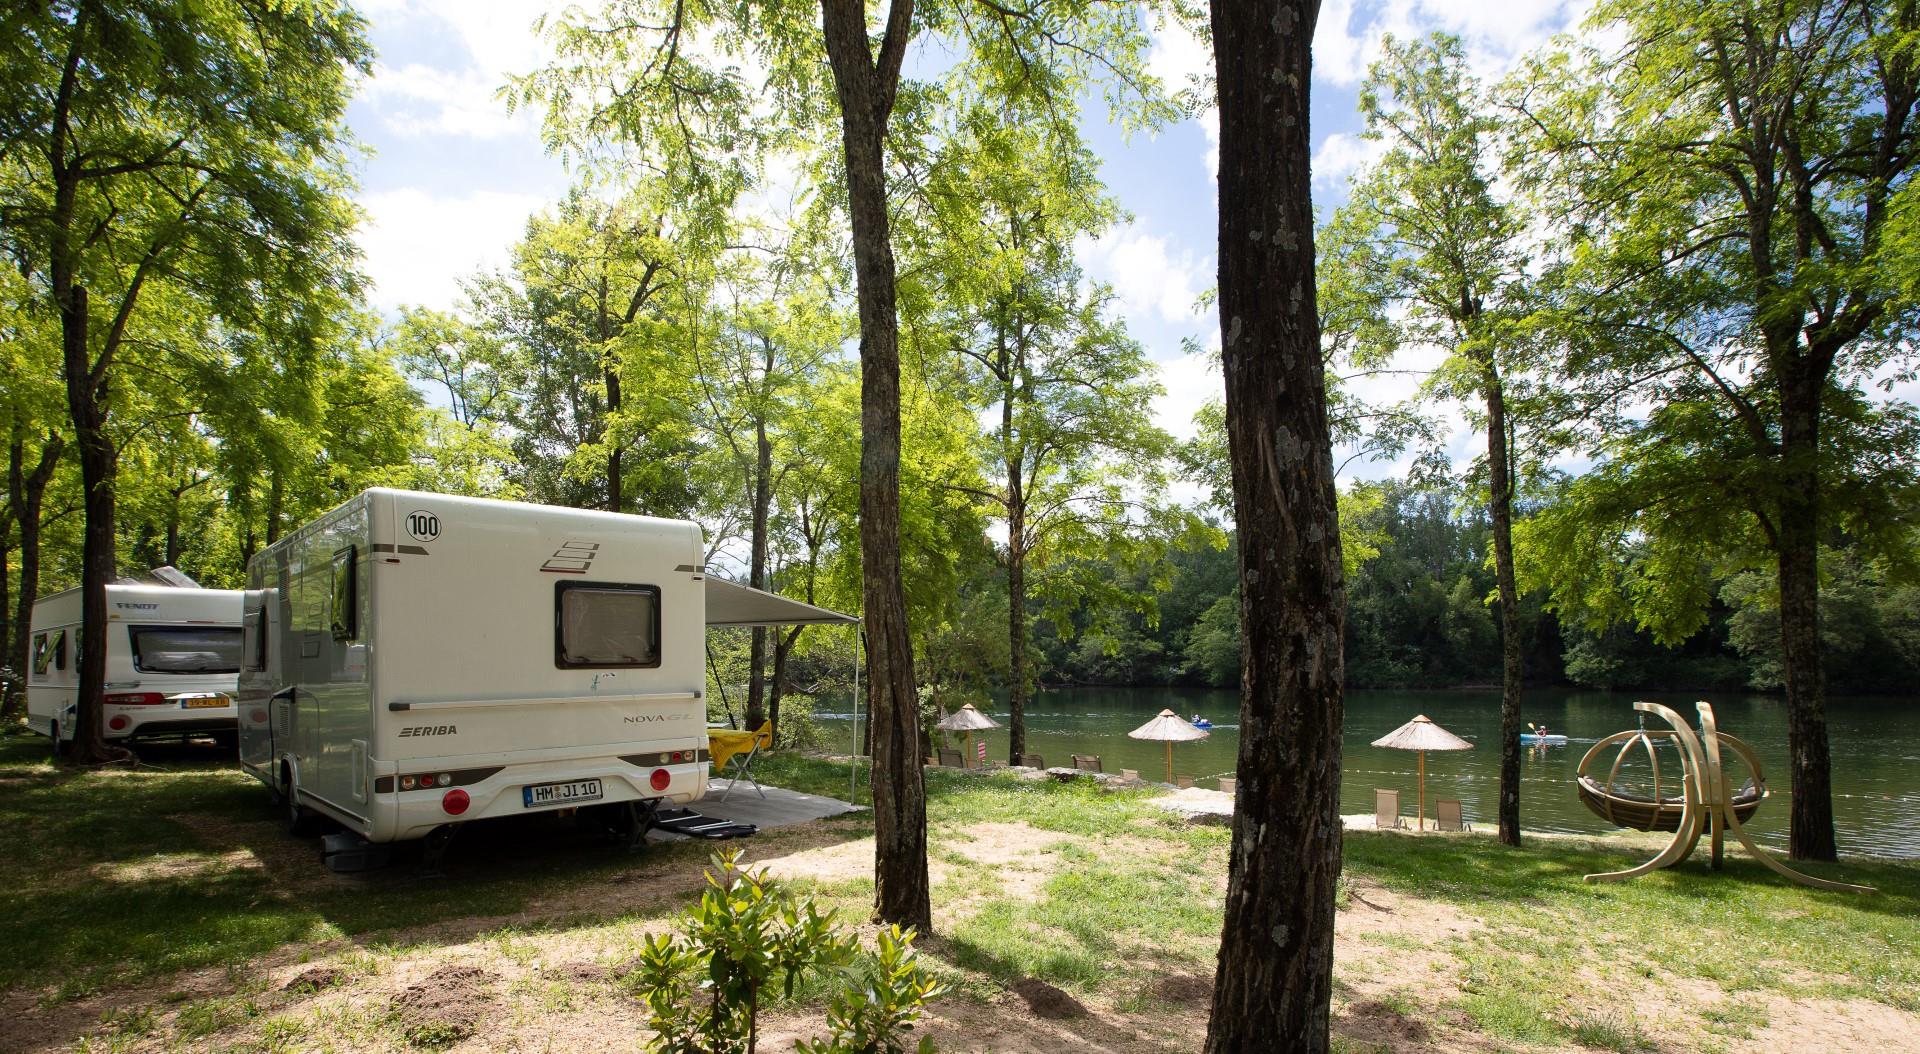 Pitch - Camping Pitch "Riverside", Including 10 Ampère Electricity - CAMPING LA ROUBINE